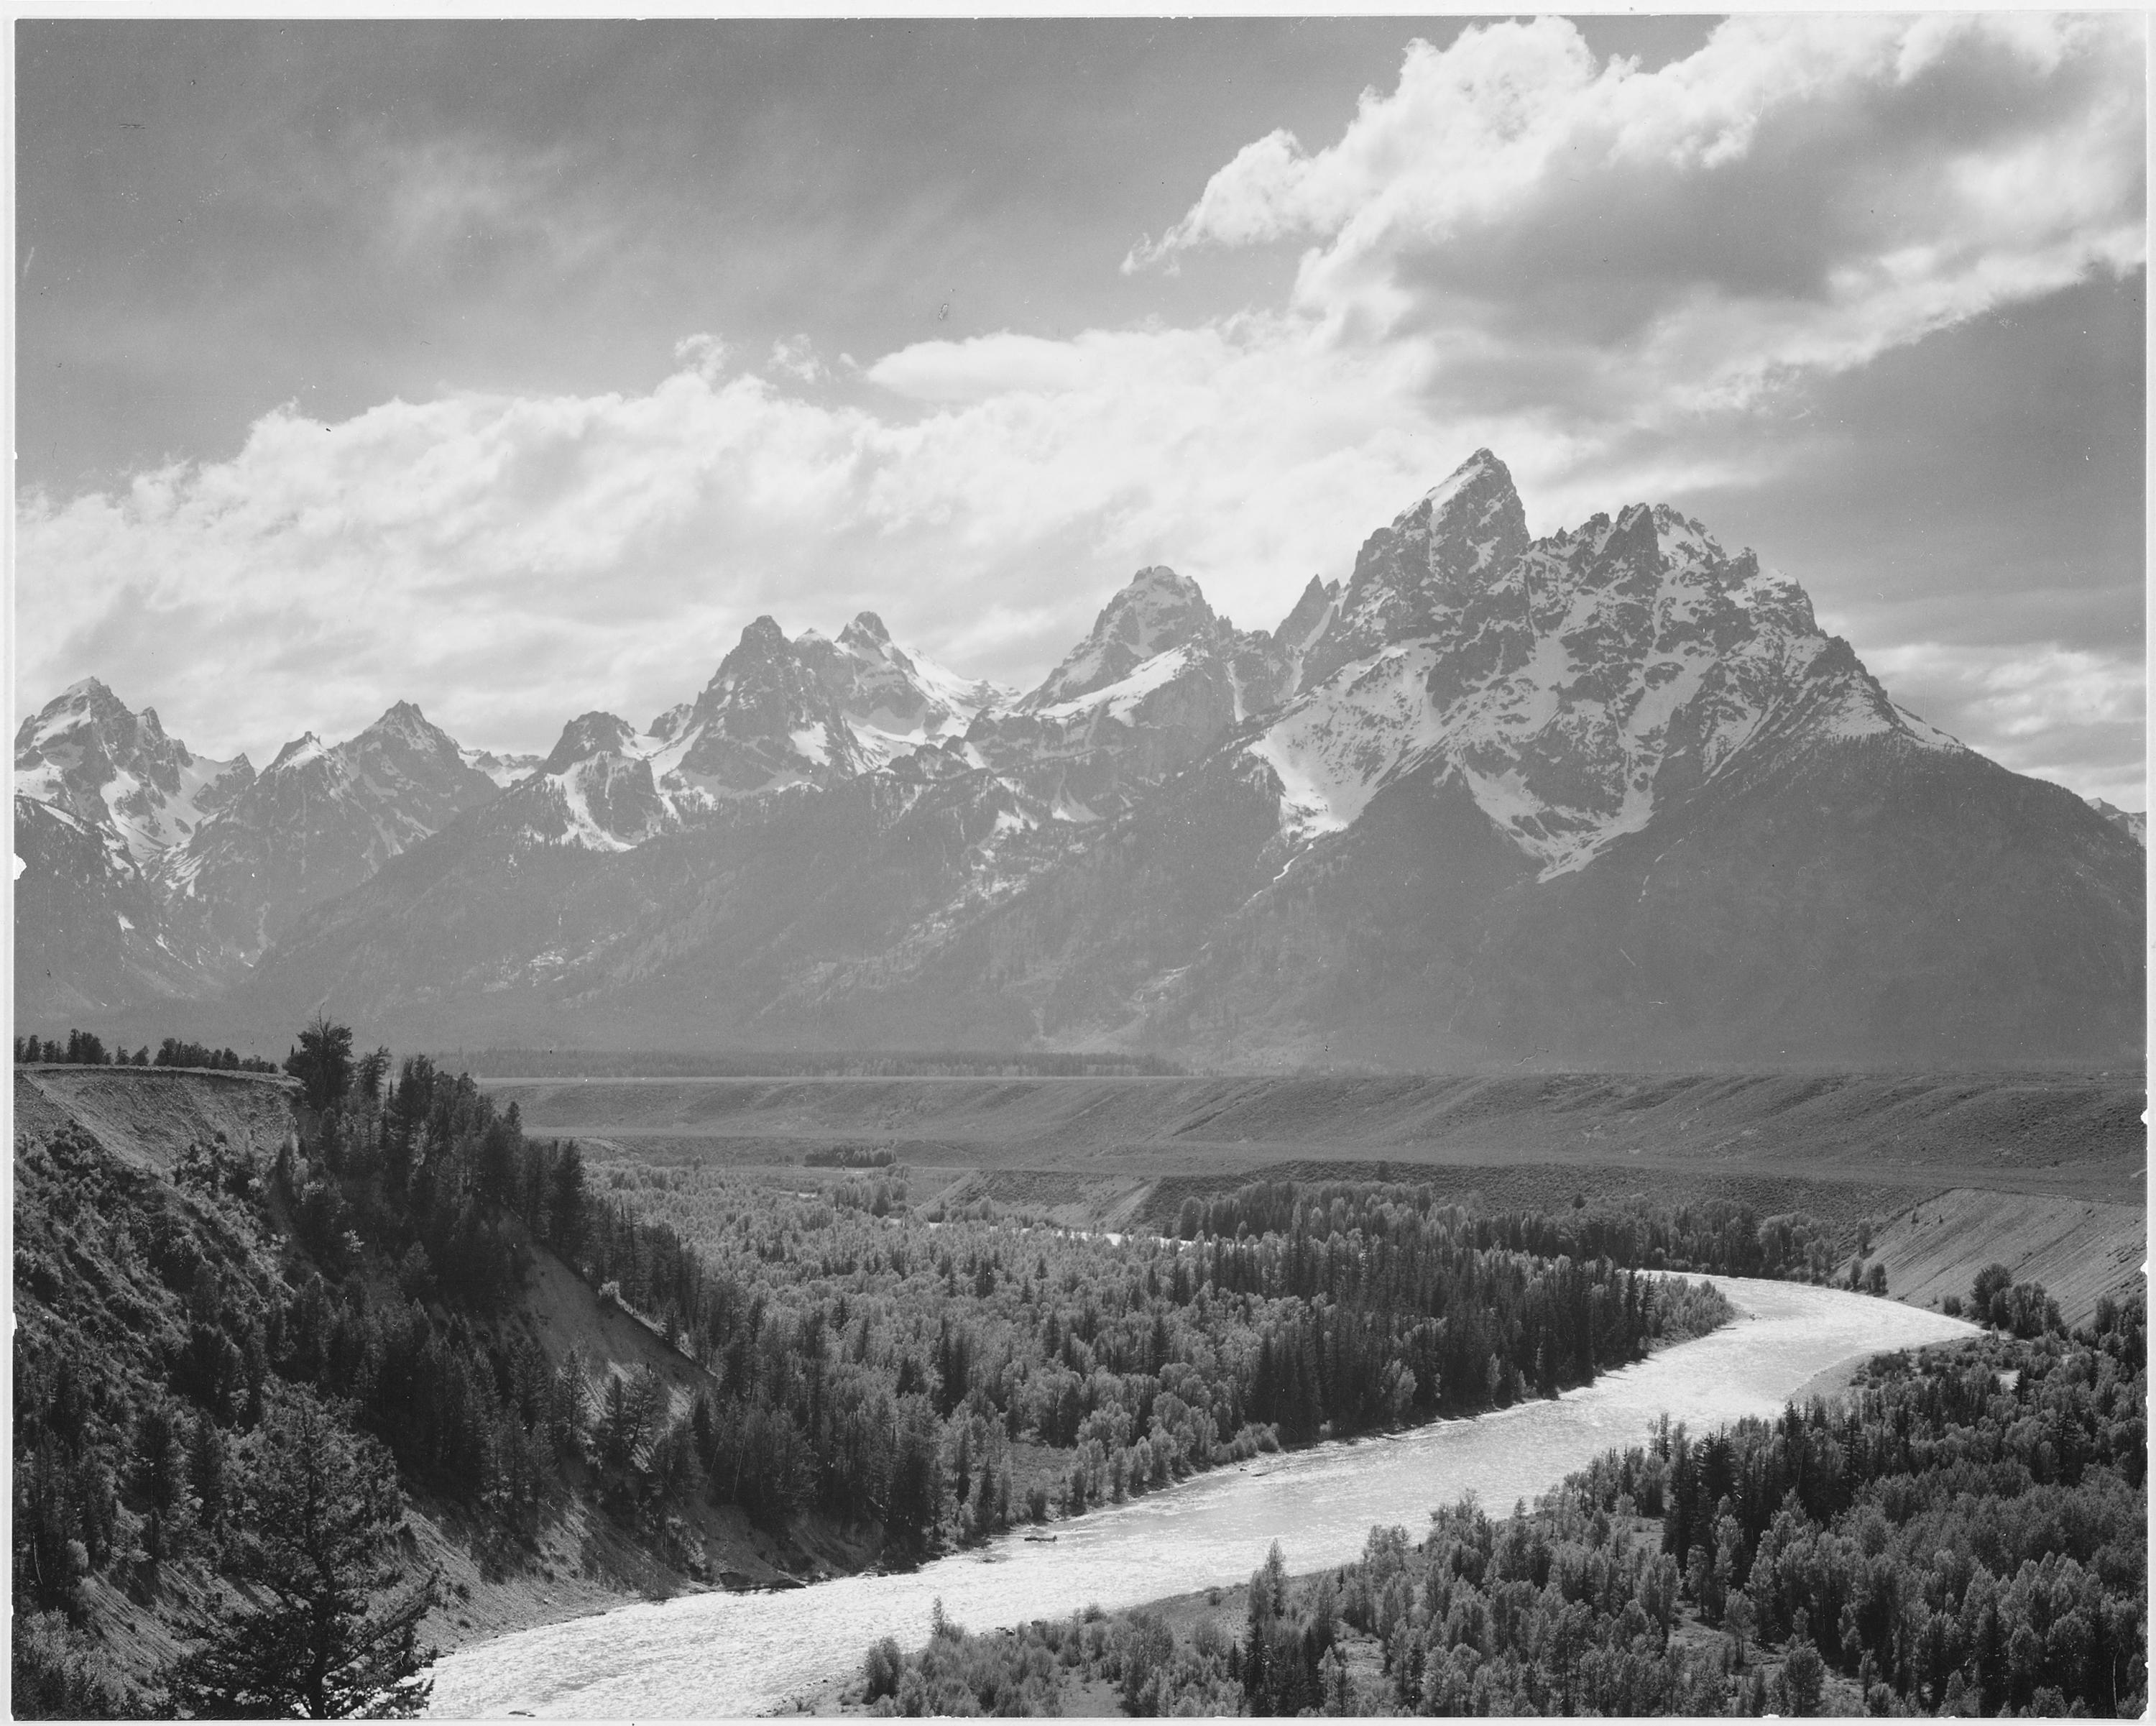 Ansel Adams - National Archives 79-AA-G02